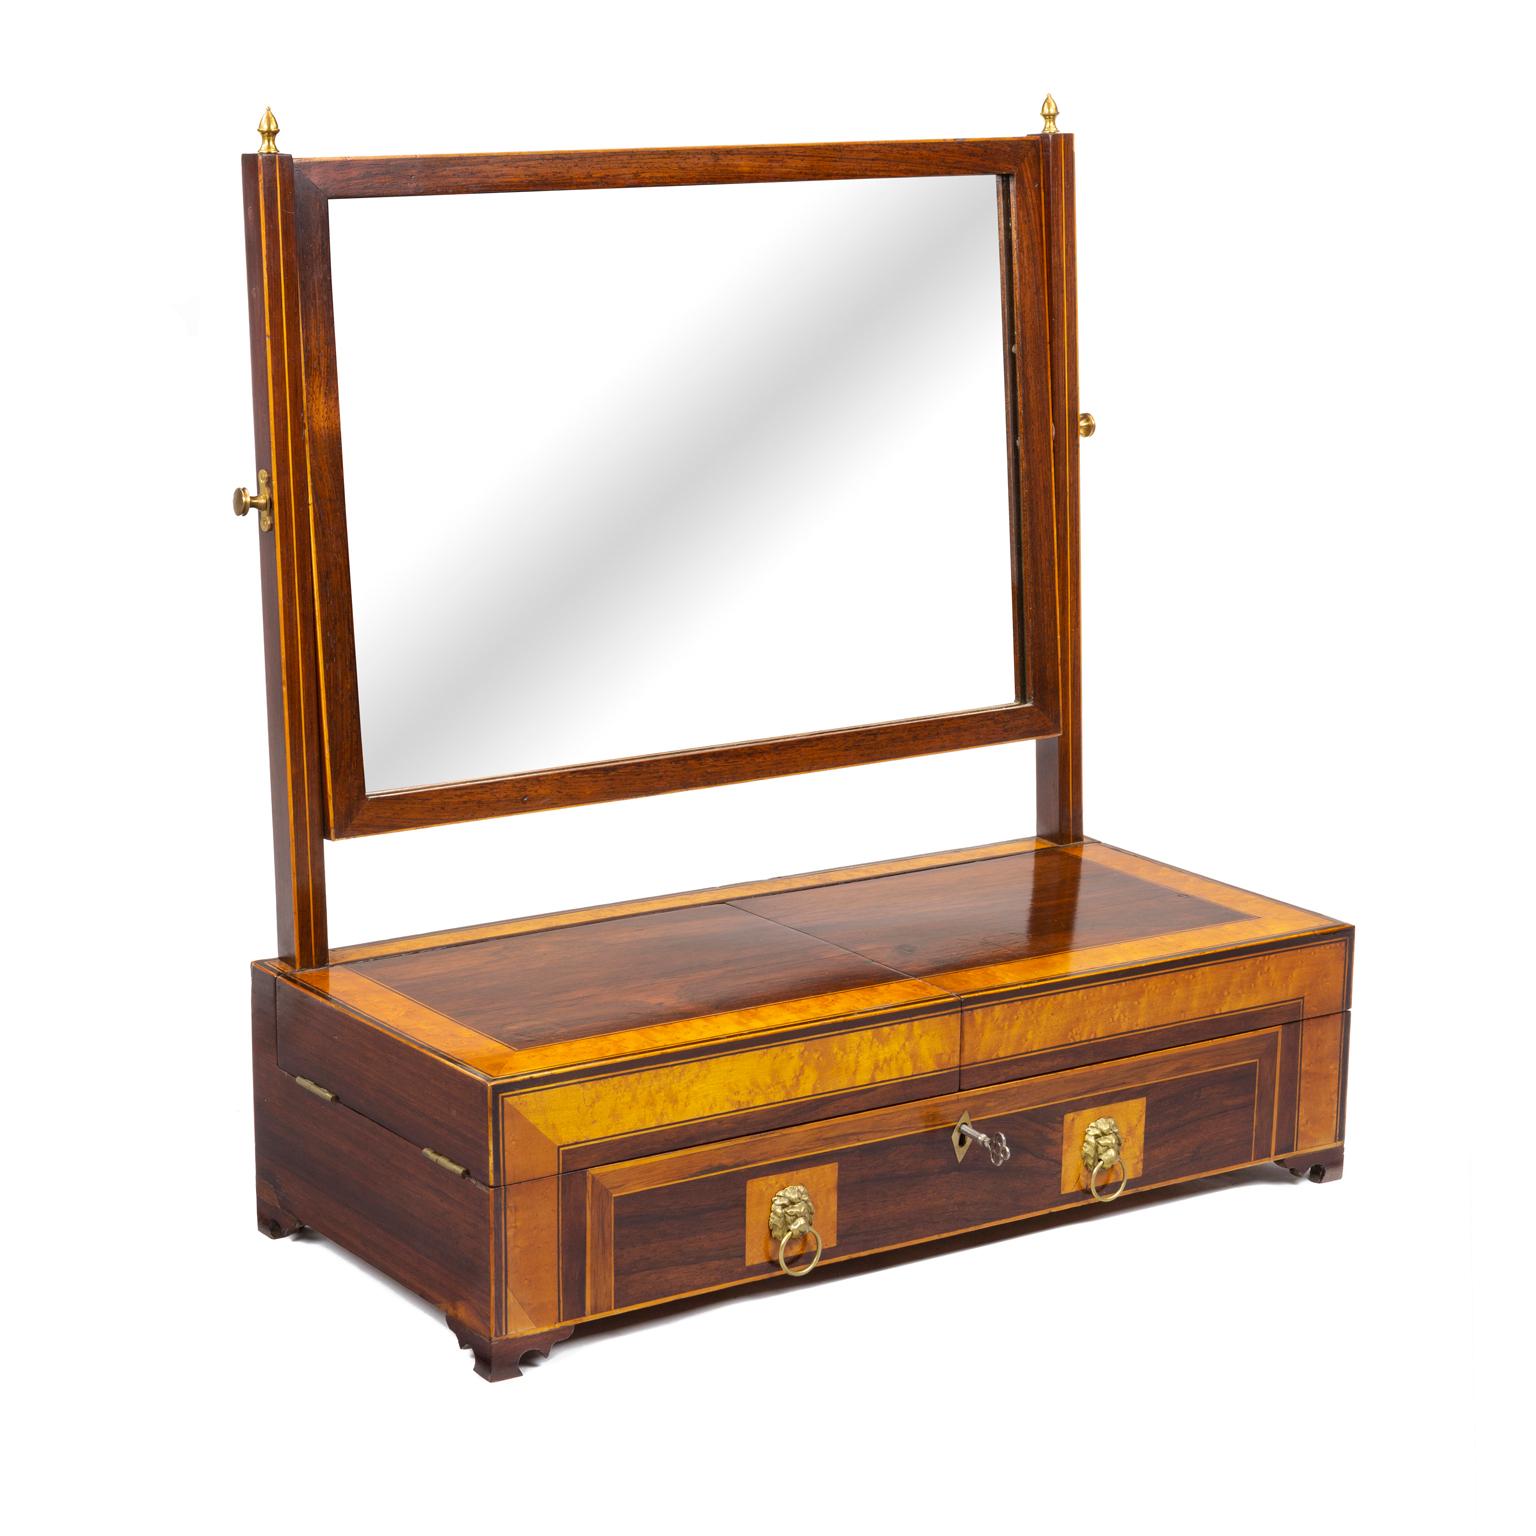 British Regency Mahogany and Satinwood Dressing Mirror and Jewelry Case